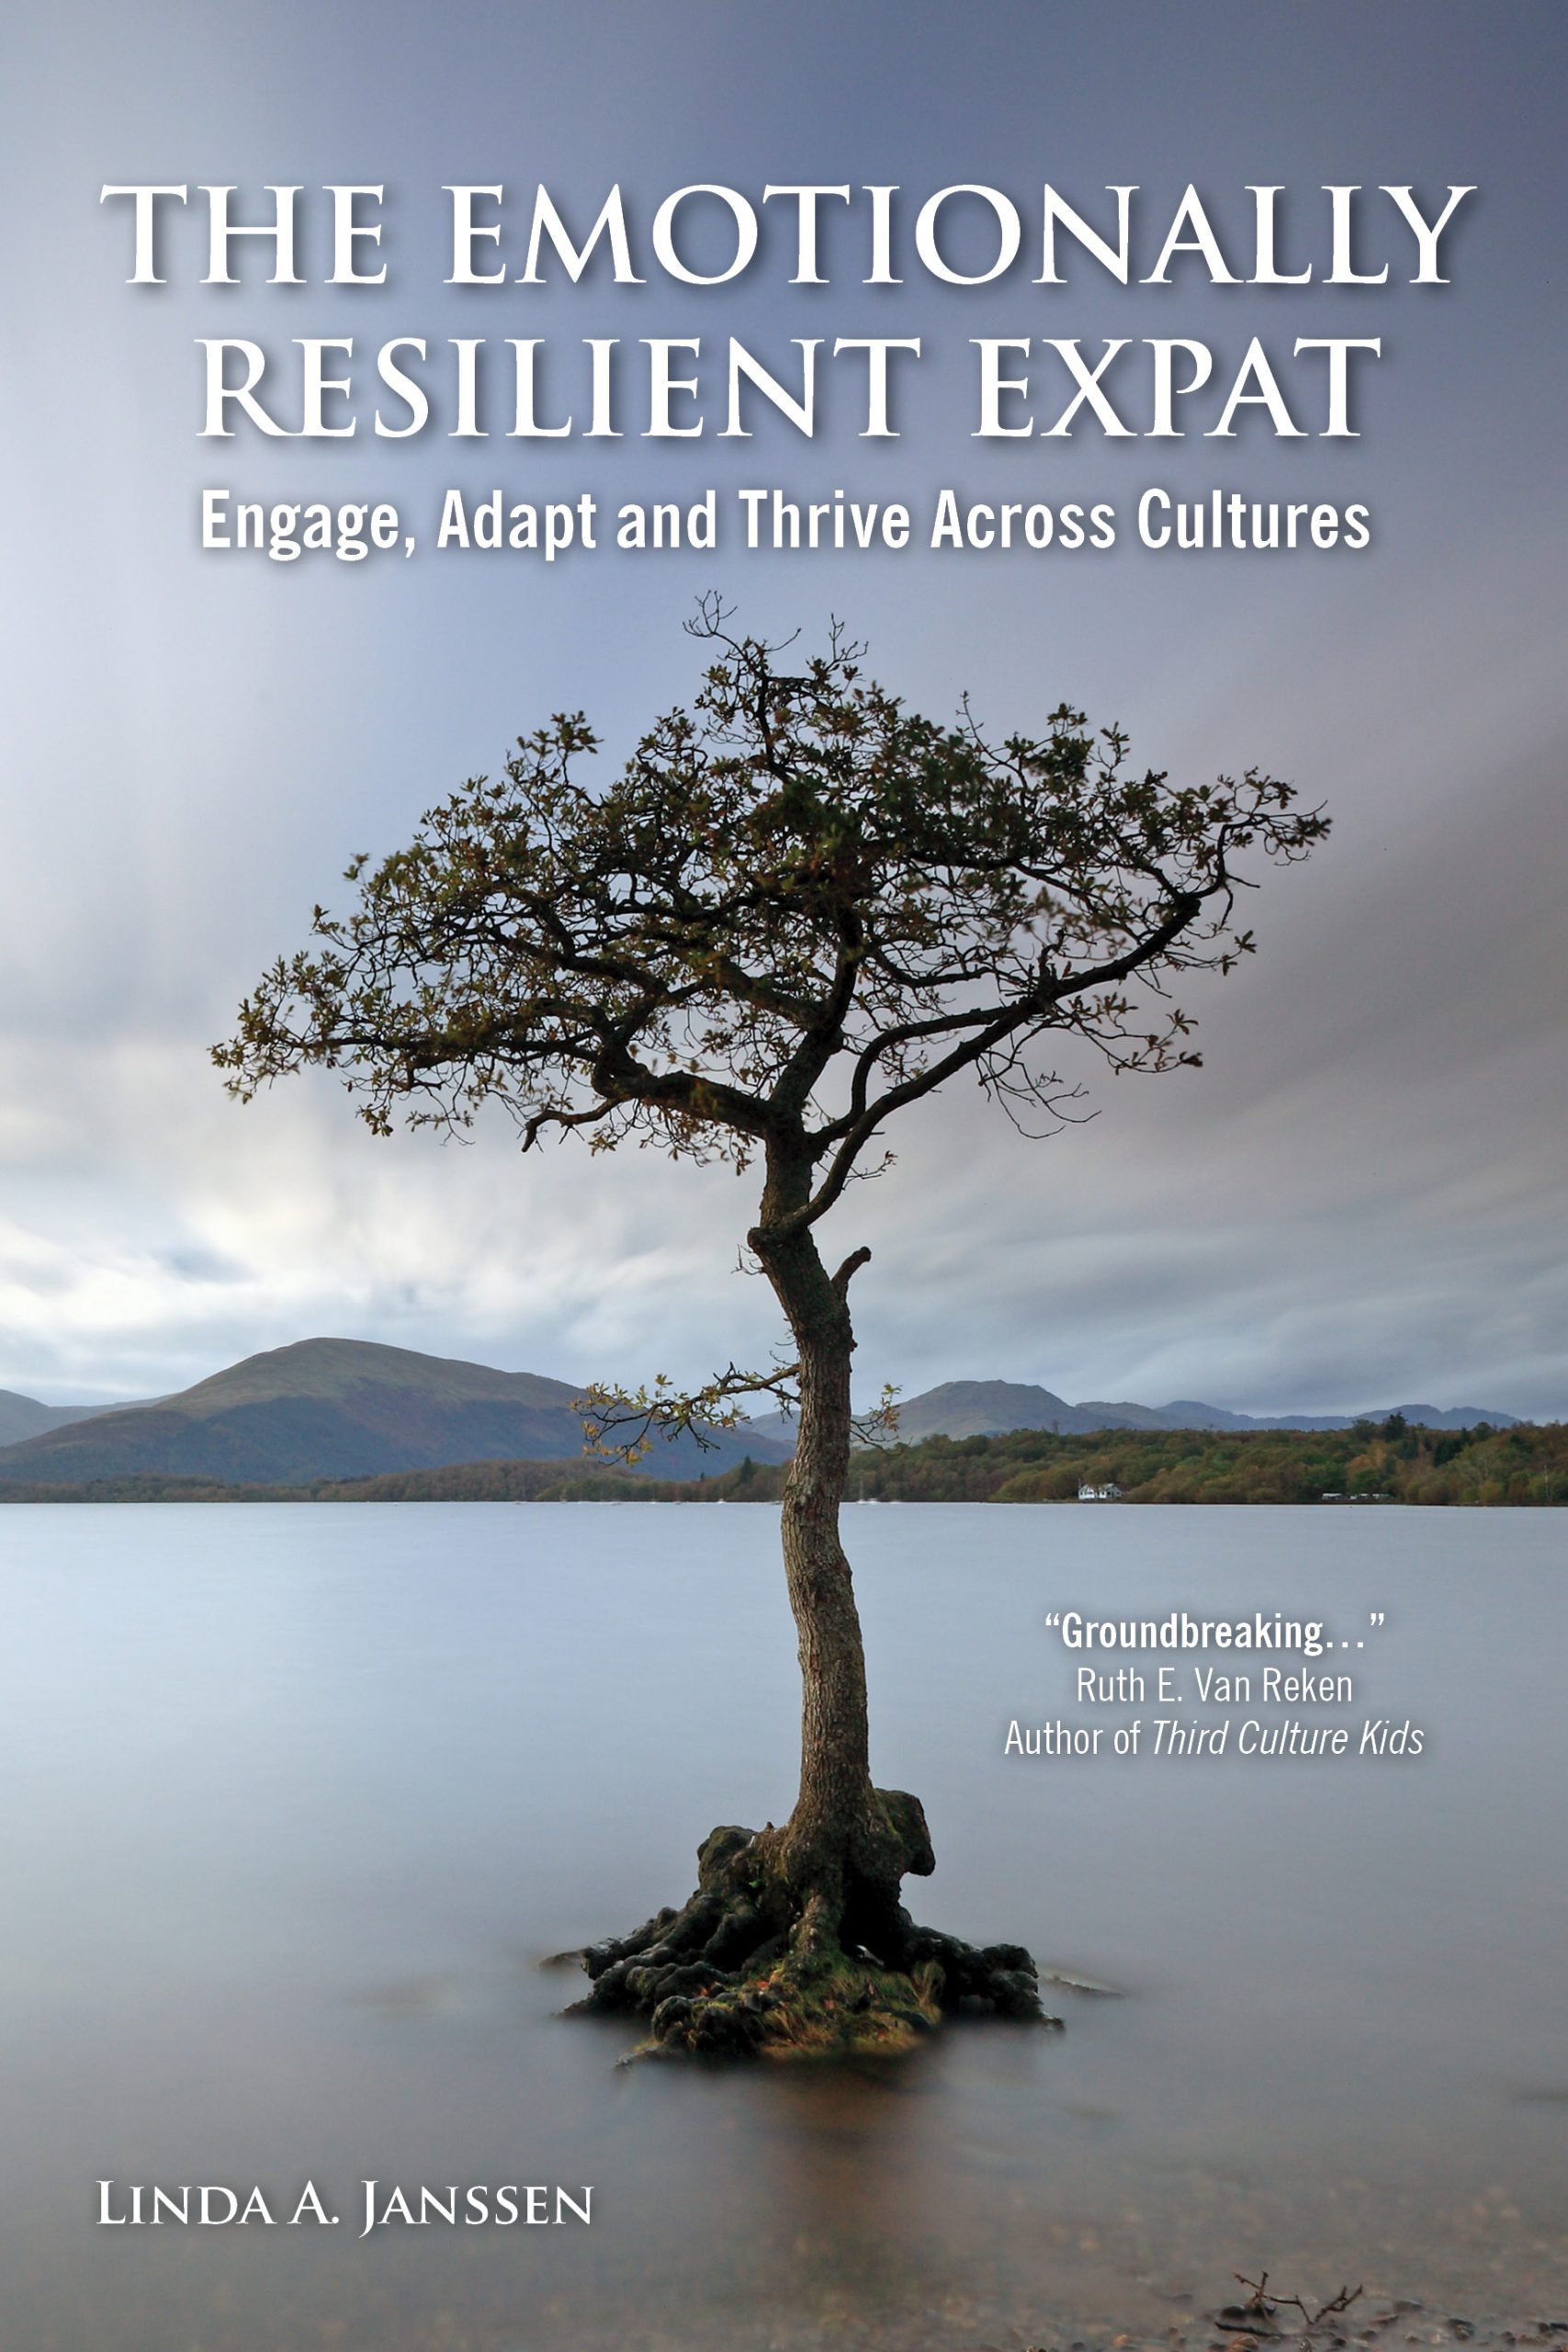 BOOK REVIEW: The Emotionally Resilient Expat: Engage, Adapt and Thrive Across Cultures (2013) by Linda A. Janssen